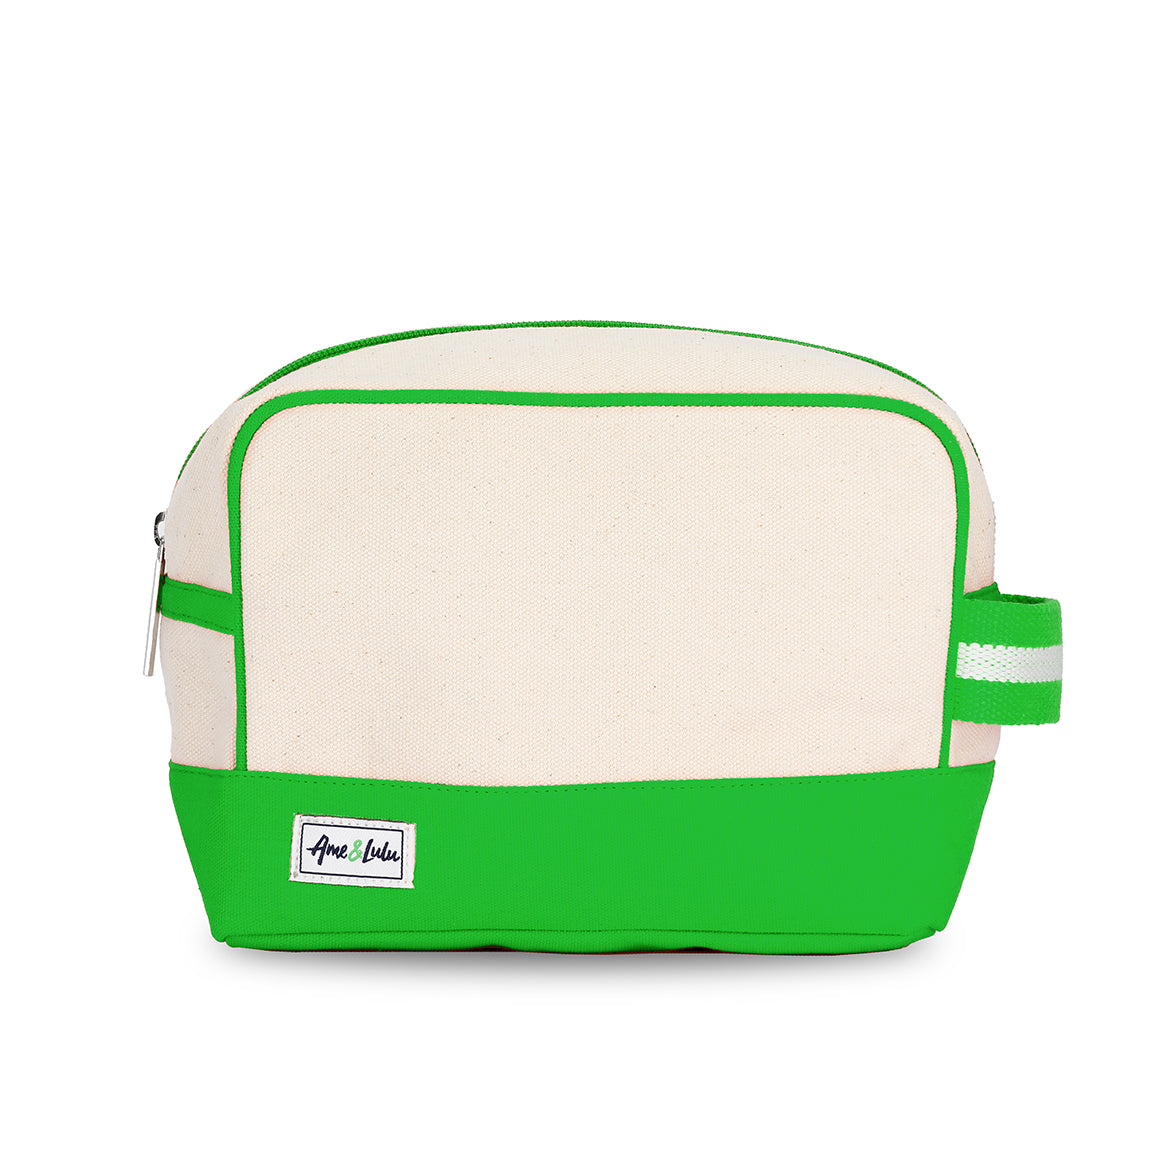 natural canvas beauty bag with white and green cotton webbing loop on the side